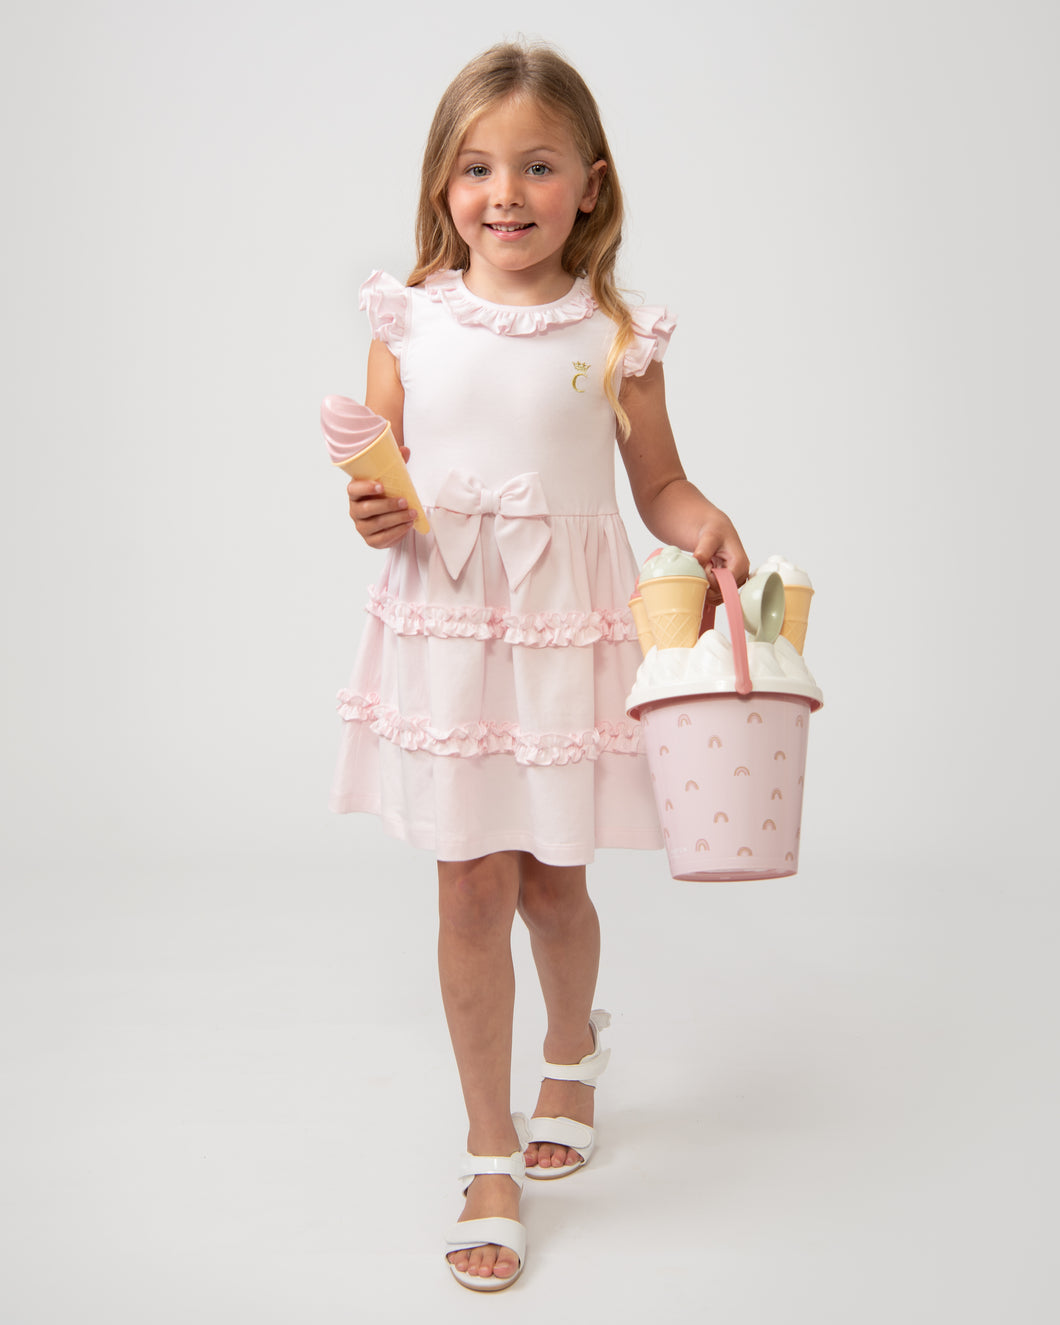 Caramelo Kids Girl's Tiered Frill Dress with Bow Pink